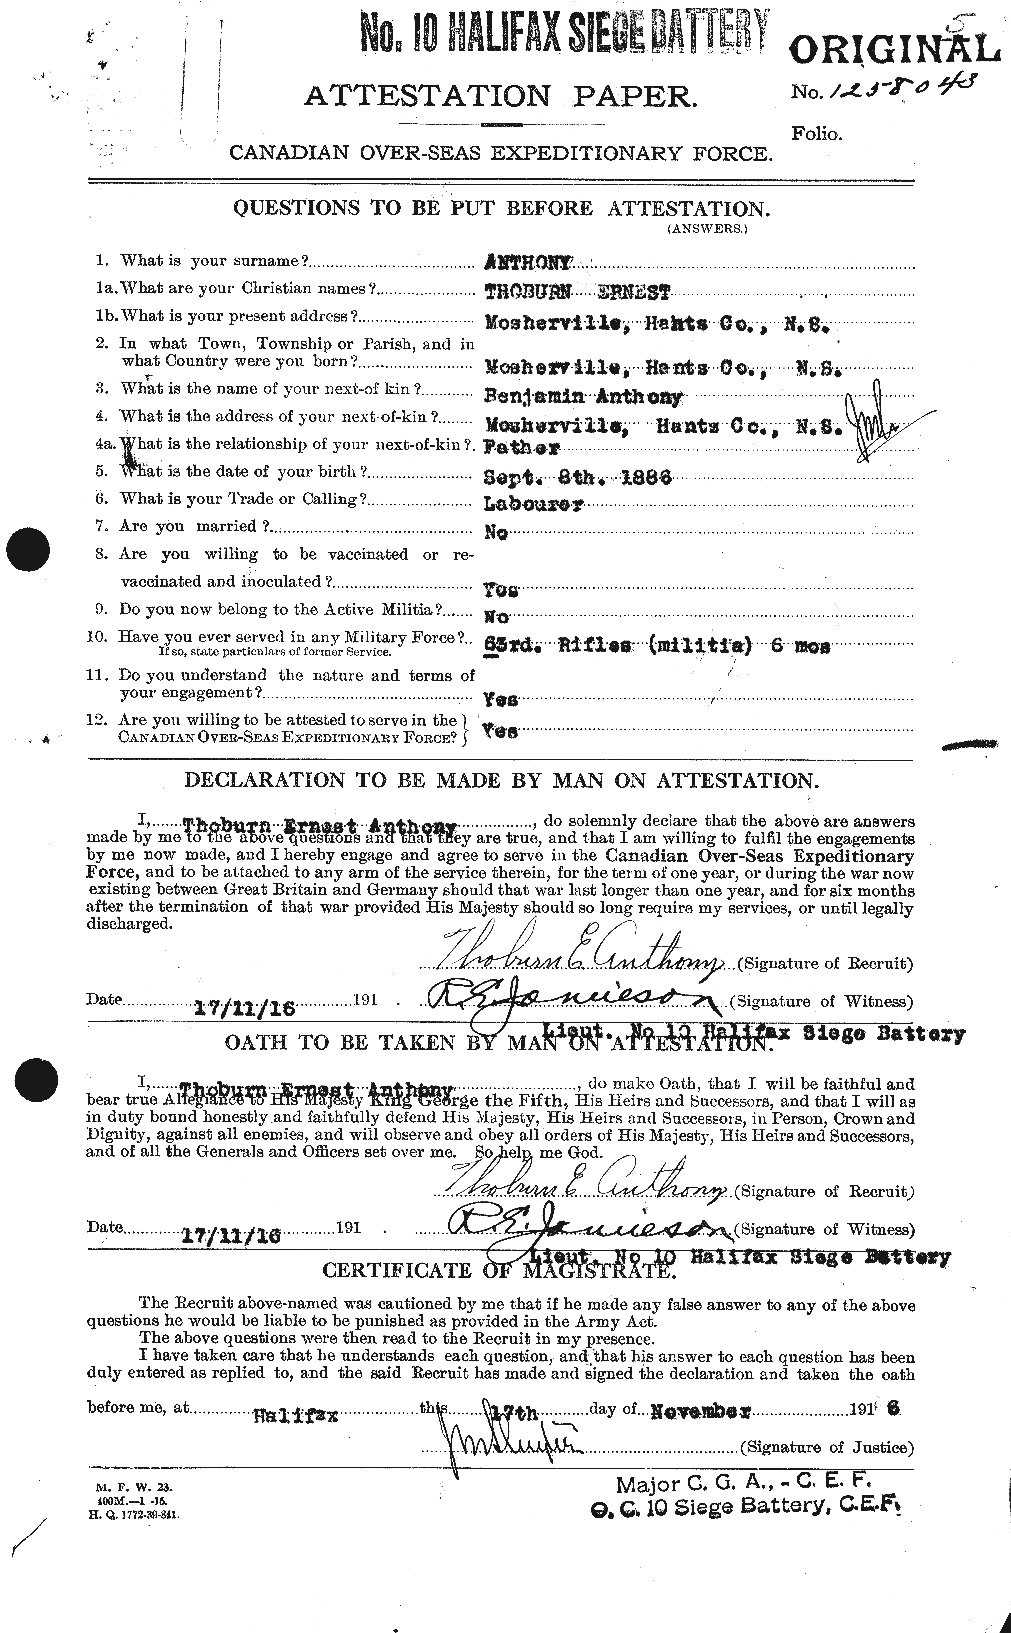 Personnel Records of the First World War - CEF 212165a